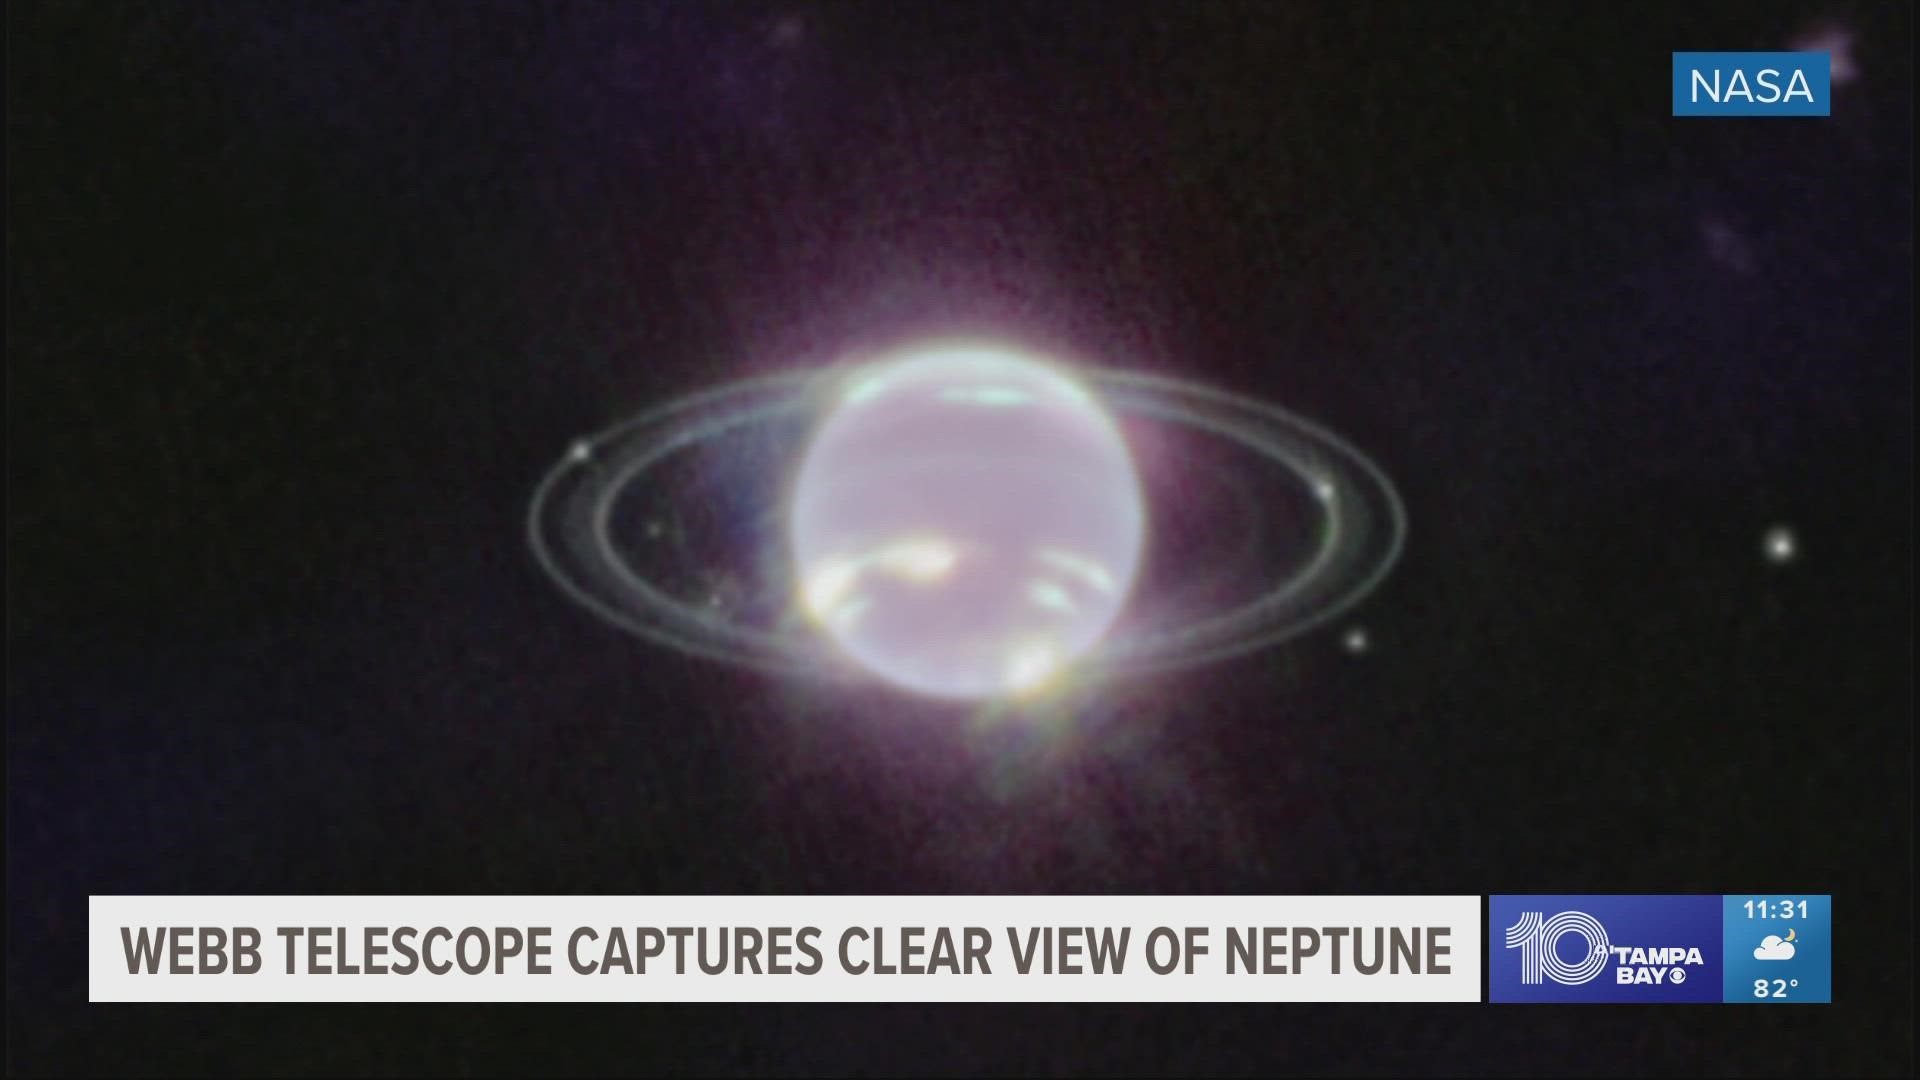 It's been three decades since astronomers last saw Neptune's rings with such detail and clarity.